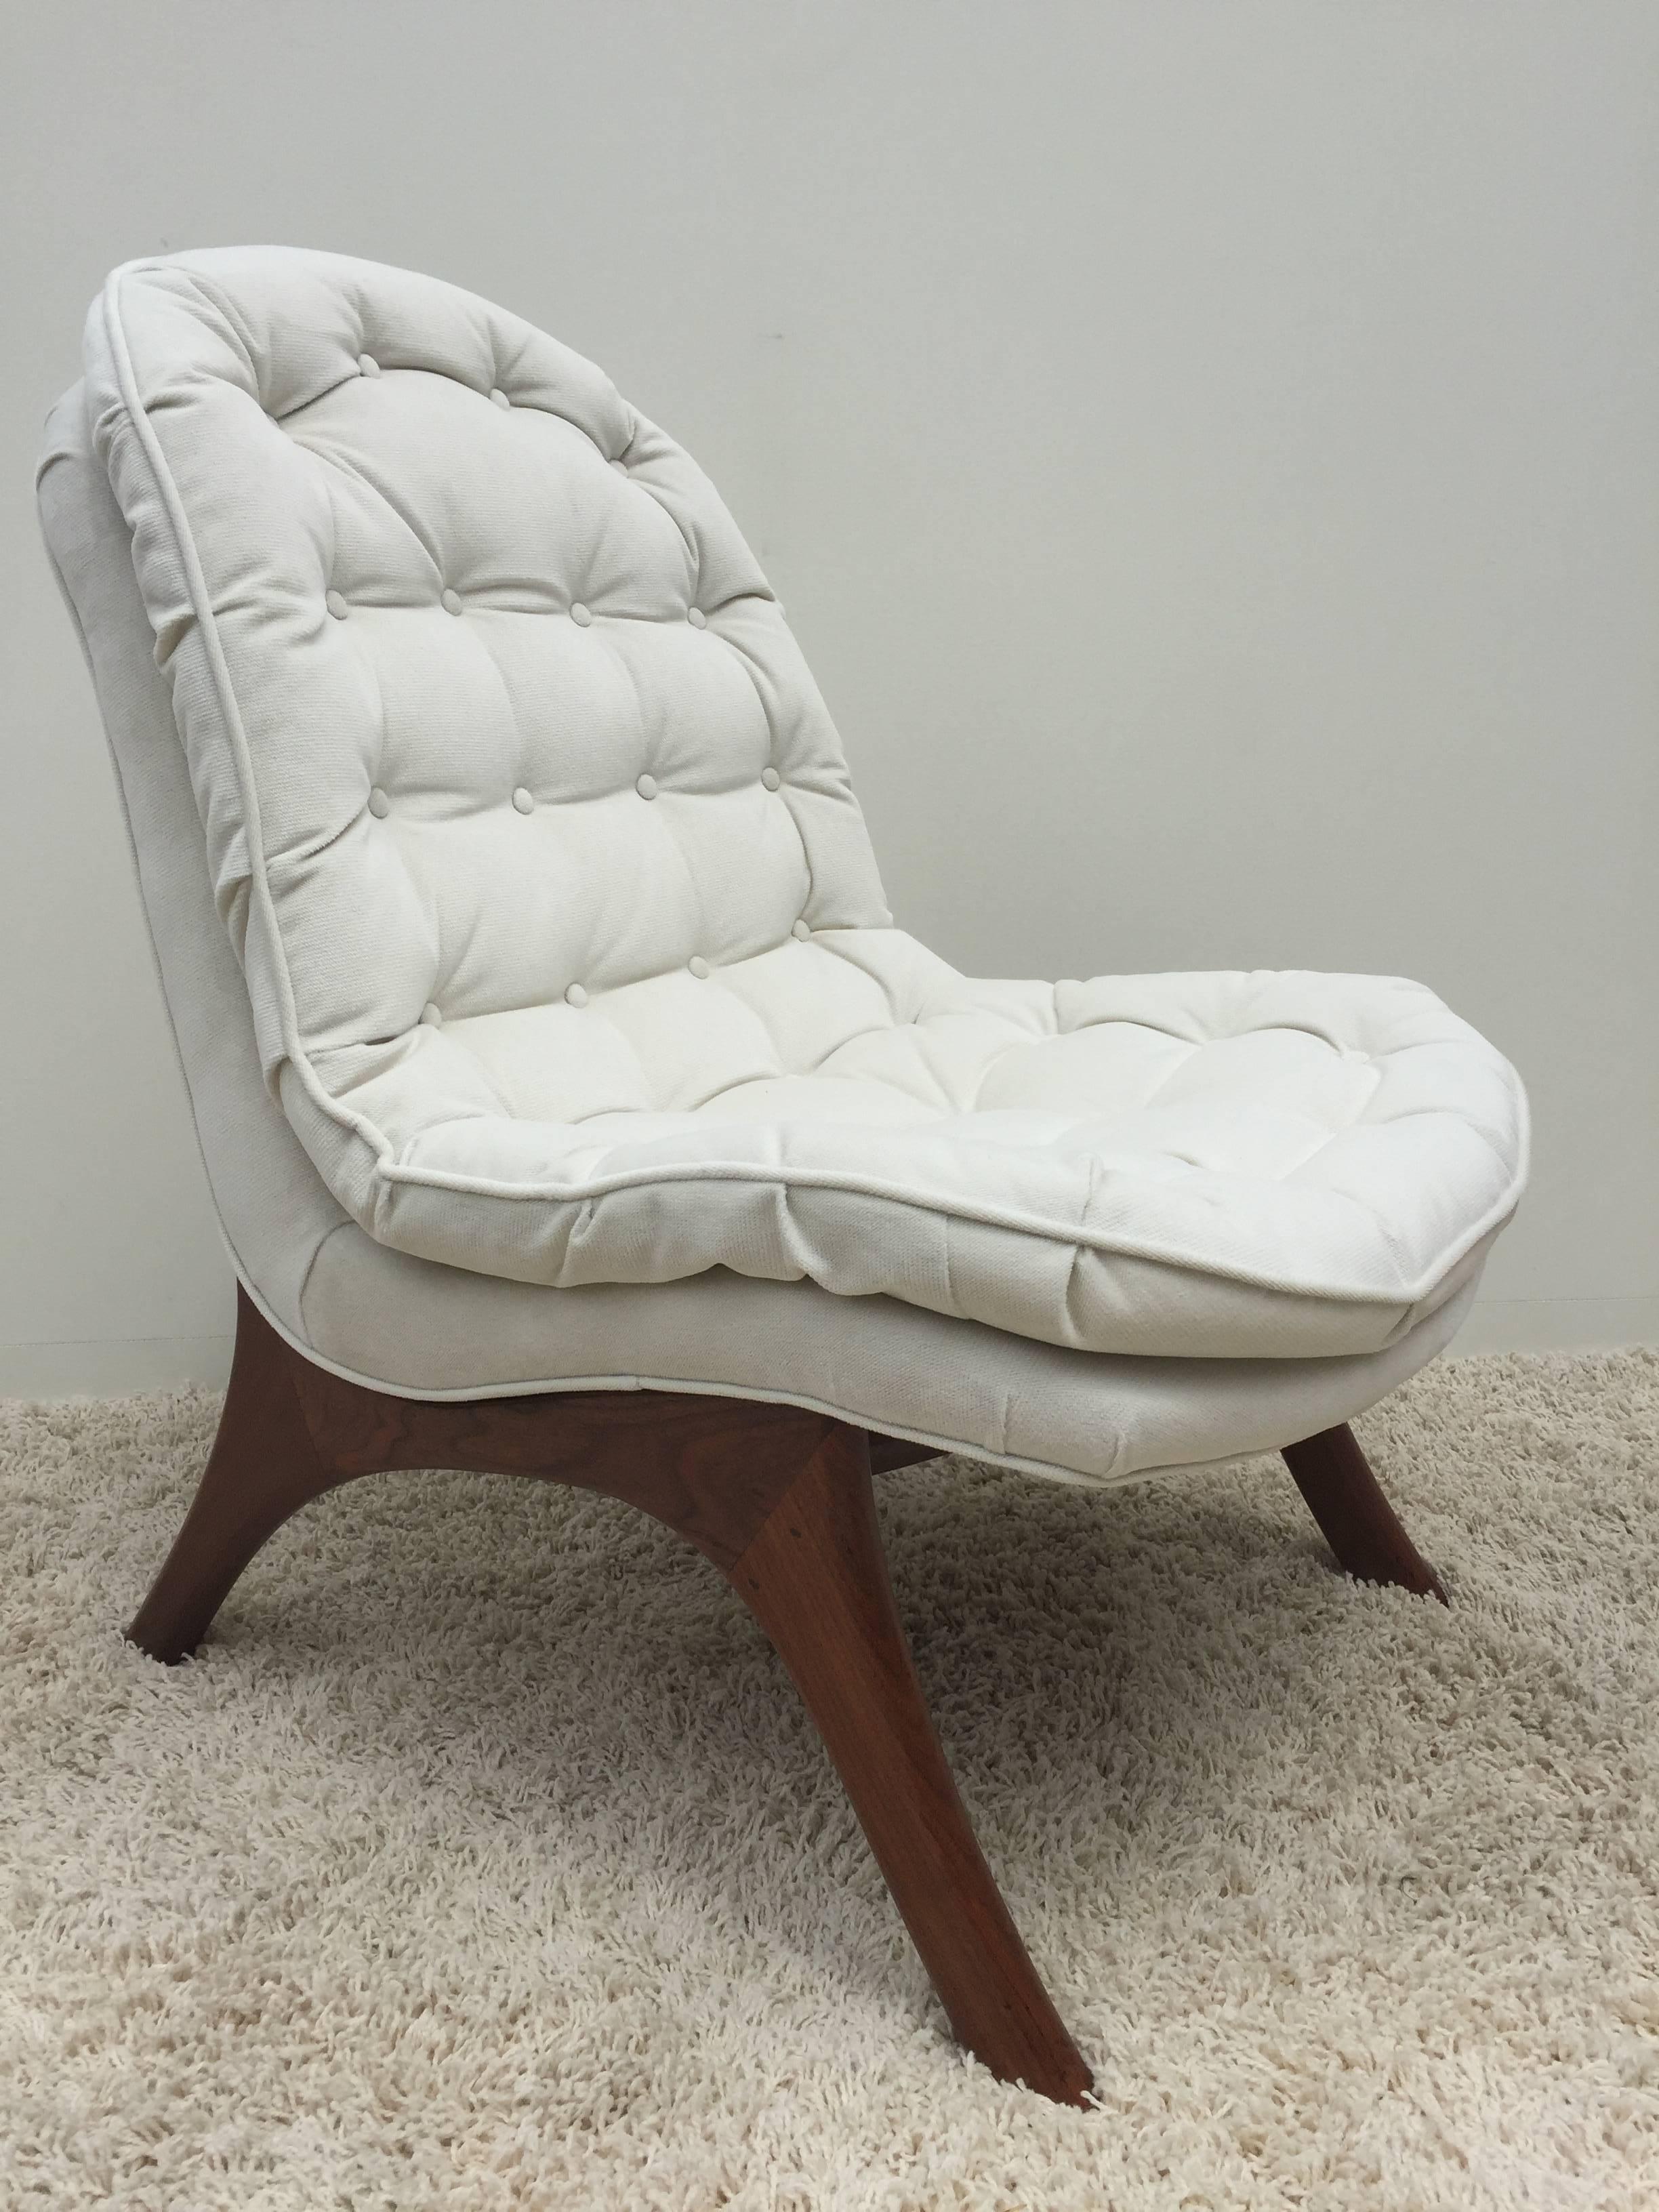 Pair of tufted off-white armless club chairs and slipper chairs with curved back and legs in the style of Adrian Pearsall.